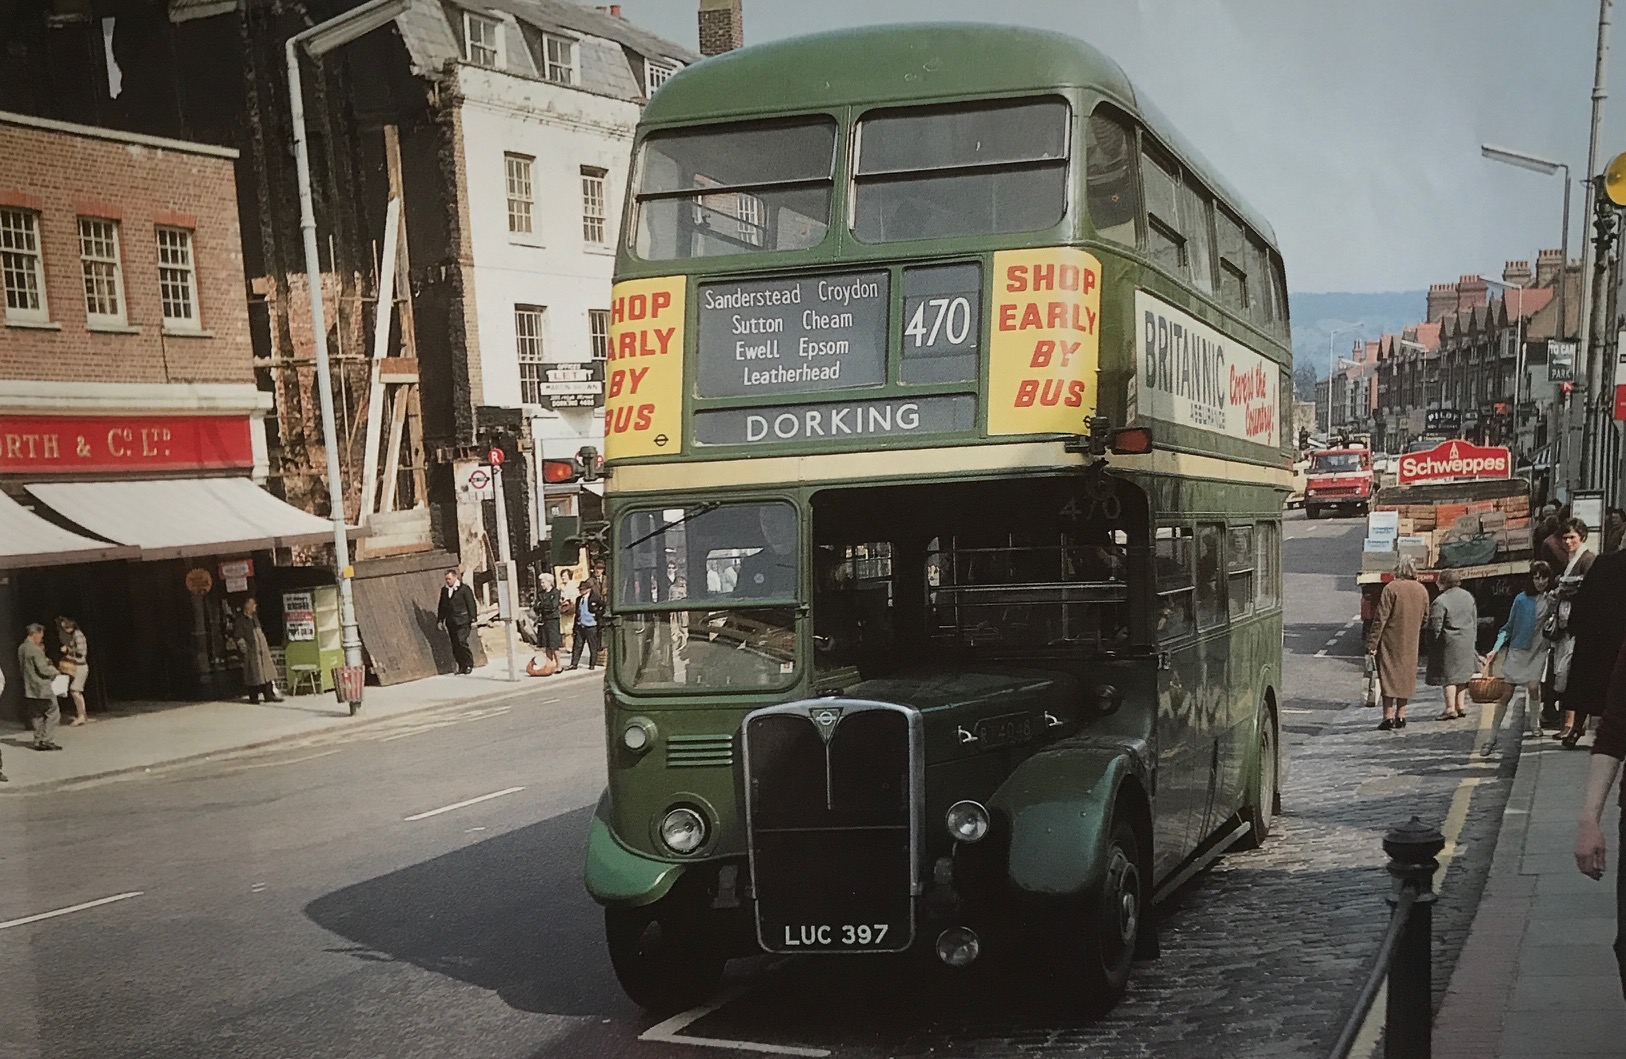 The Bench: Dorking High Street 1969….. The 470 (notice Woolworths). Those were the days. Take note of the sign board on the bus.